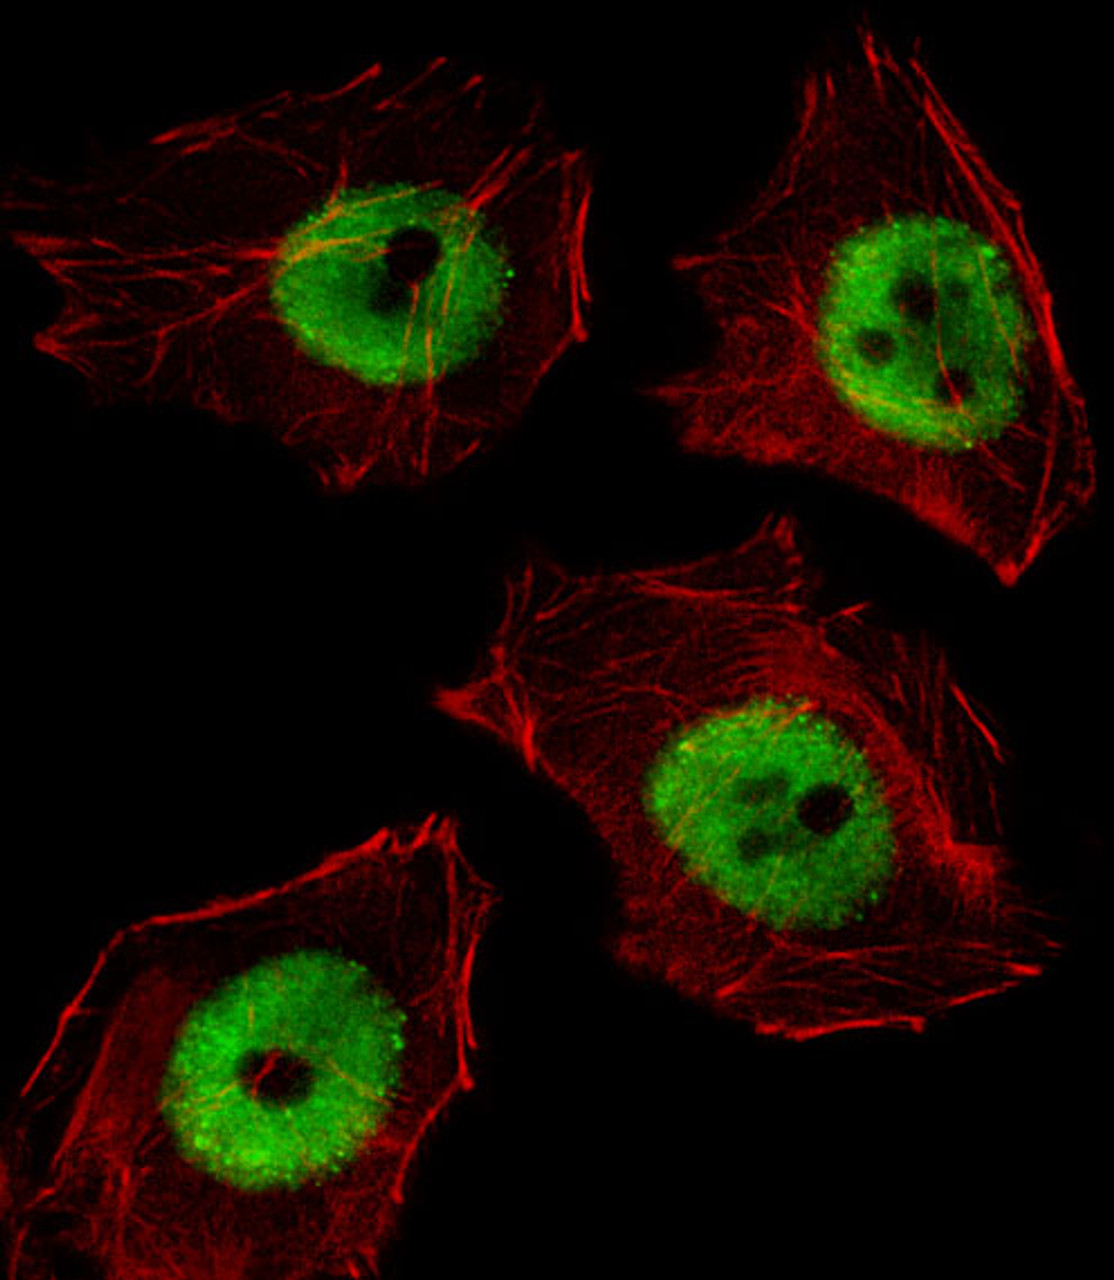 Fluorescent image of A549 cell stained with UBP1 Antibody .A549 cells were fixed with 4% PFA (20 min) , permeabilized with Triton X-100 (0.1%, 10 min) , then incubated with UBP1 primary antibody (1:25) . For secondary antibody, Alexa Fluor 488 conjugated donkey anti-rabbit antibody (green) was used (1:400) .Cytoplasmic actin was counterstained with Alexa Fluor 555 (red) conjugated Phalloidin (7units/ml) .UBP1 immunoreactivity is localized to Nucleus significantly.